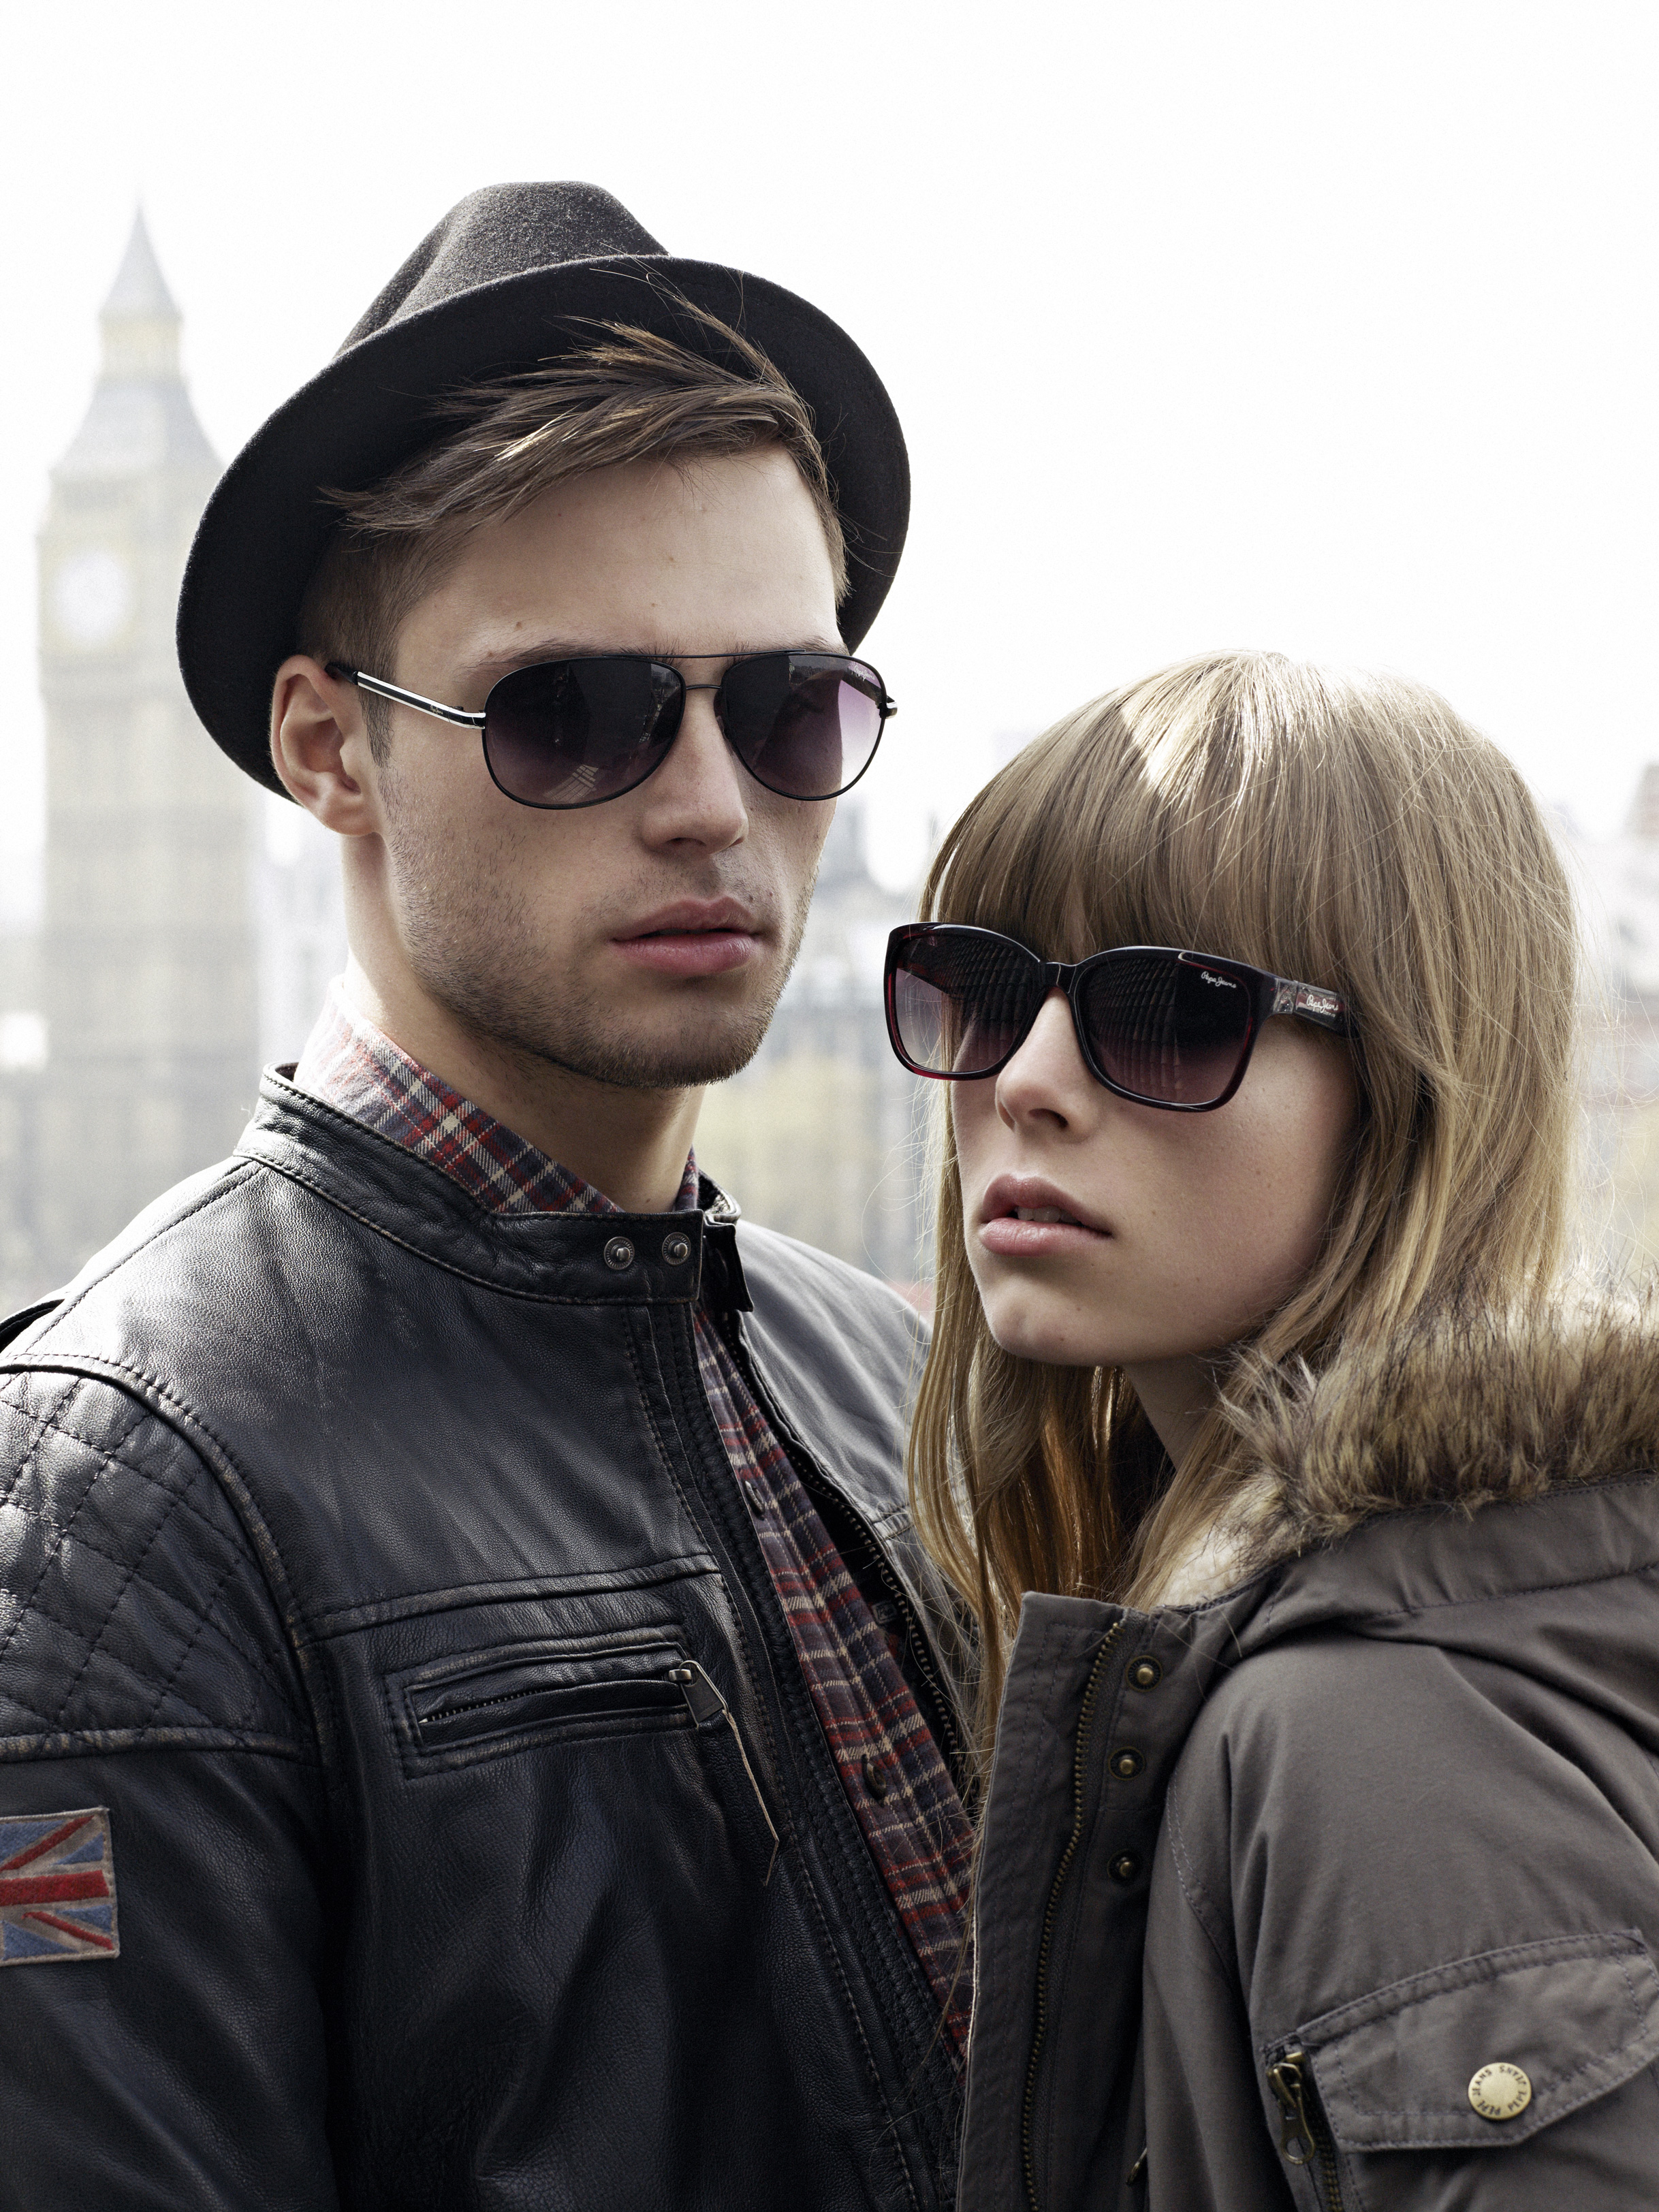 Pepe Jeans AW 2012 Ad Campaign 7